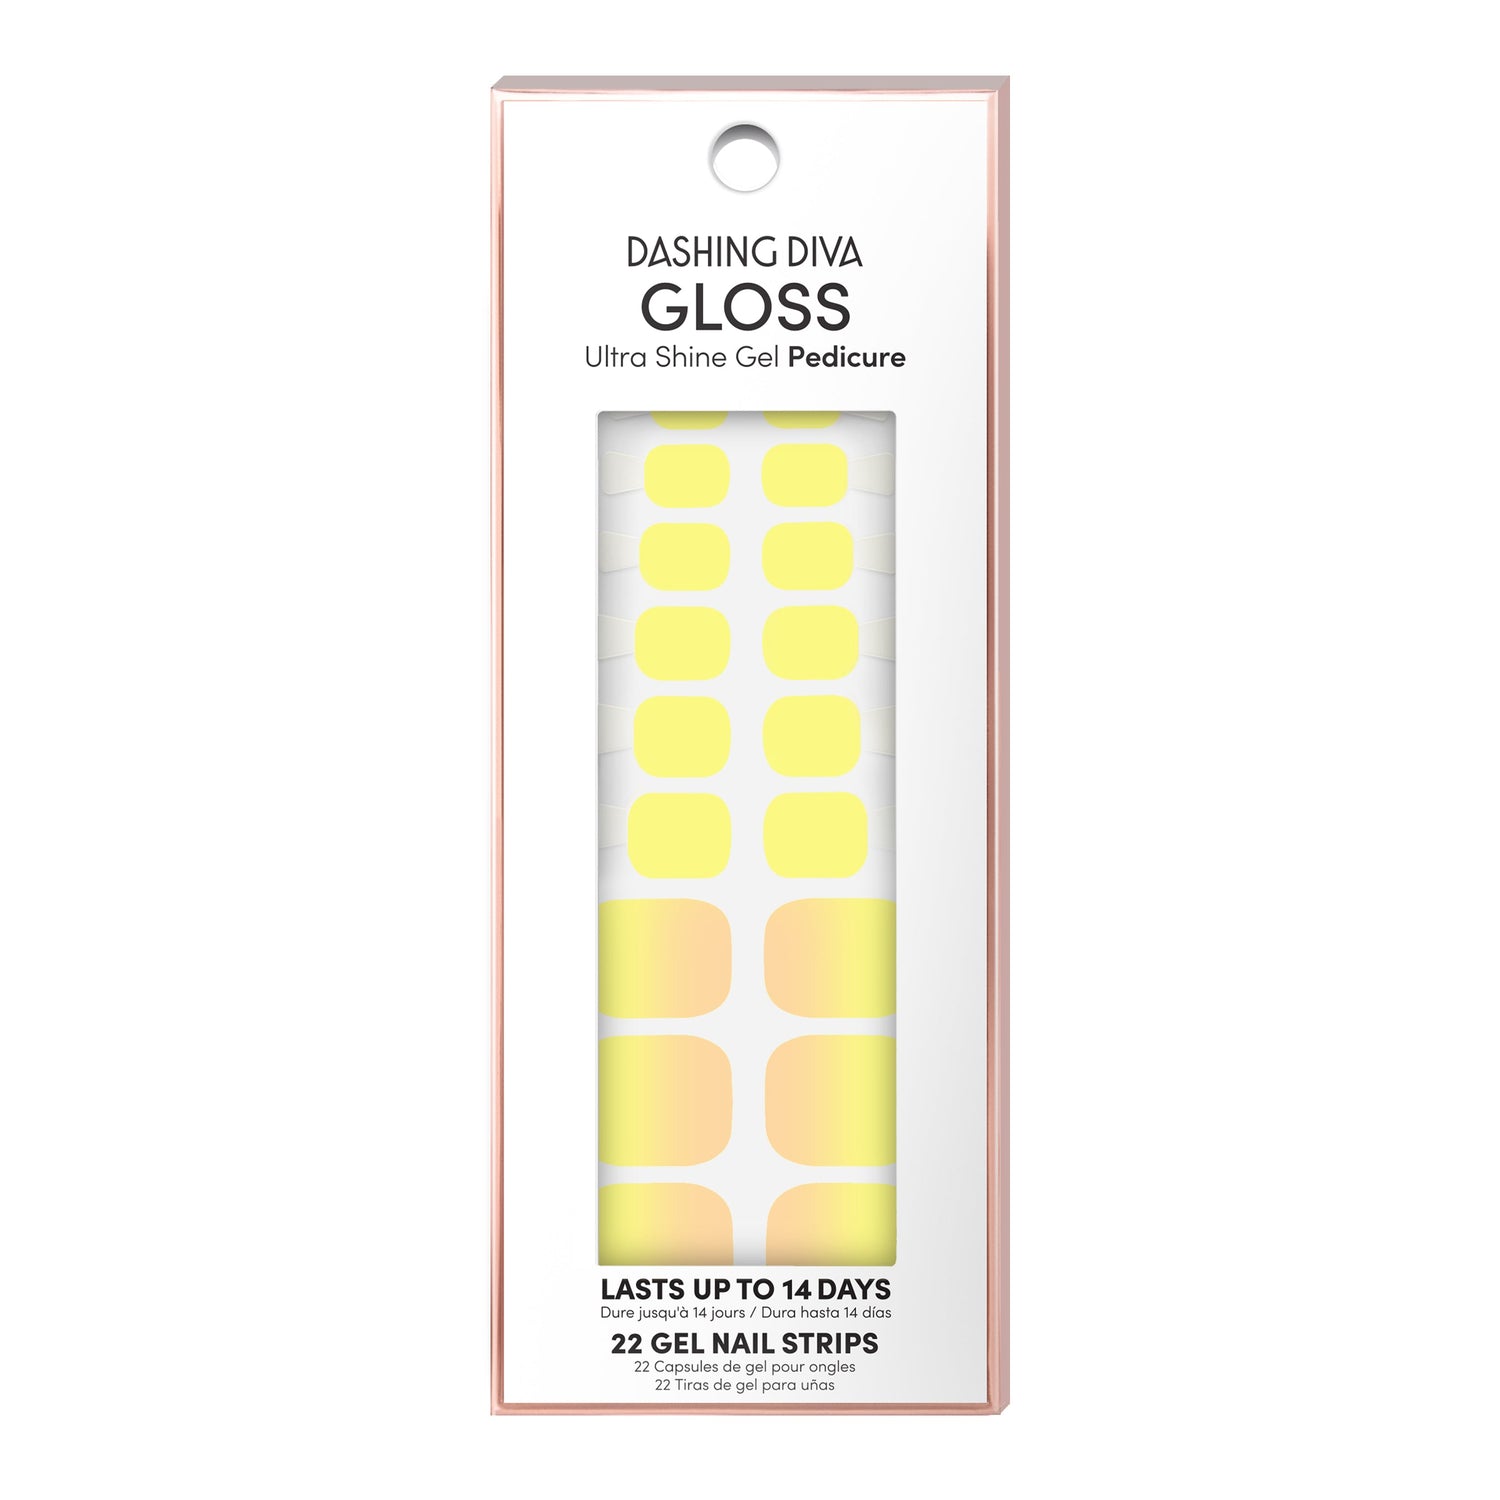 Dashing Diva GLOSS Pedicure yellow and pink ombre gel pedi strips.